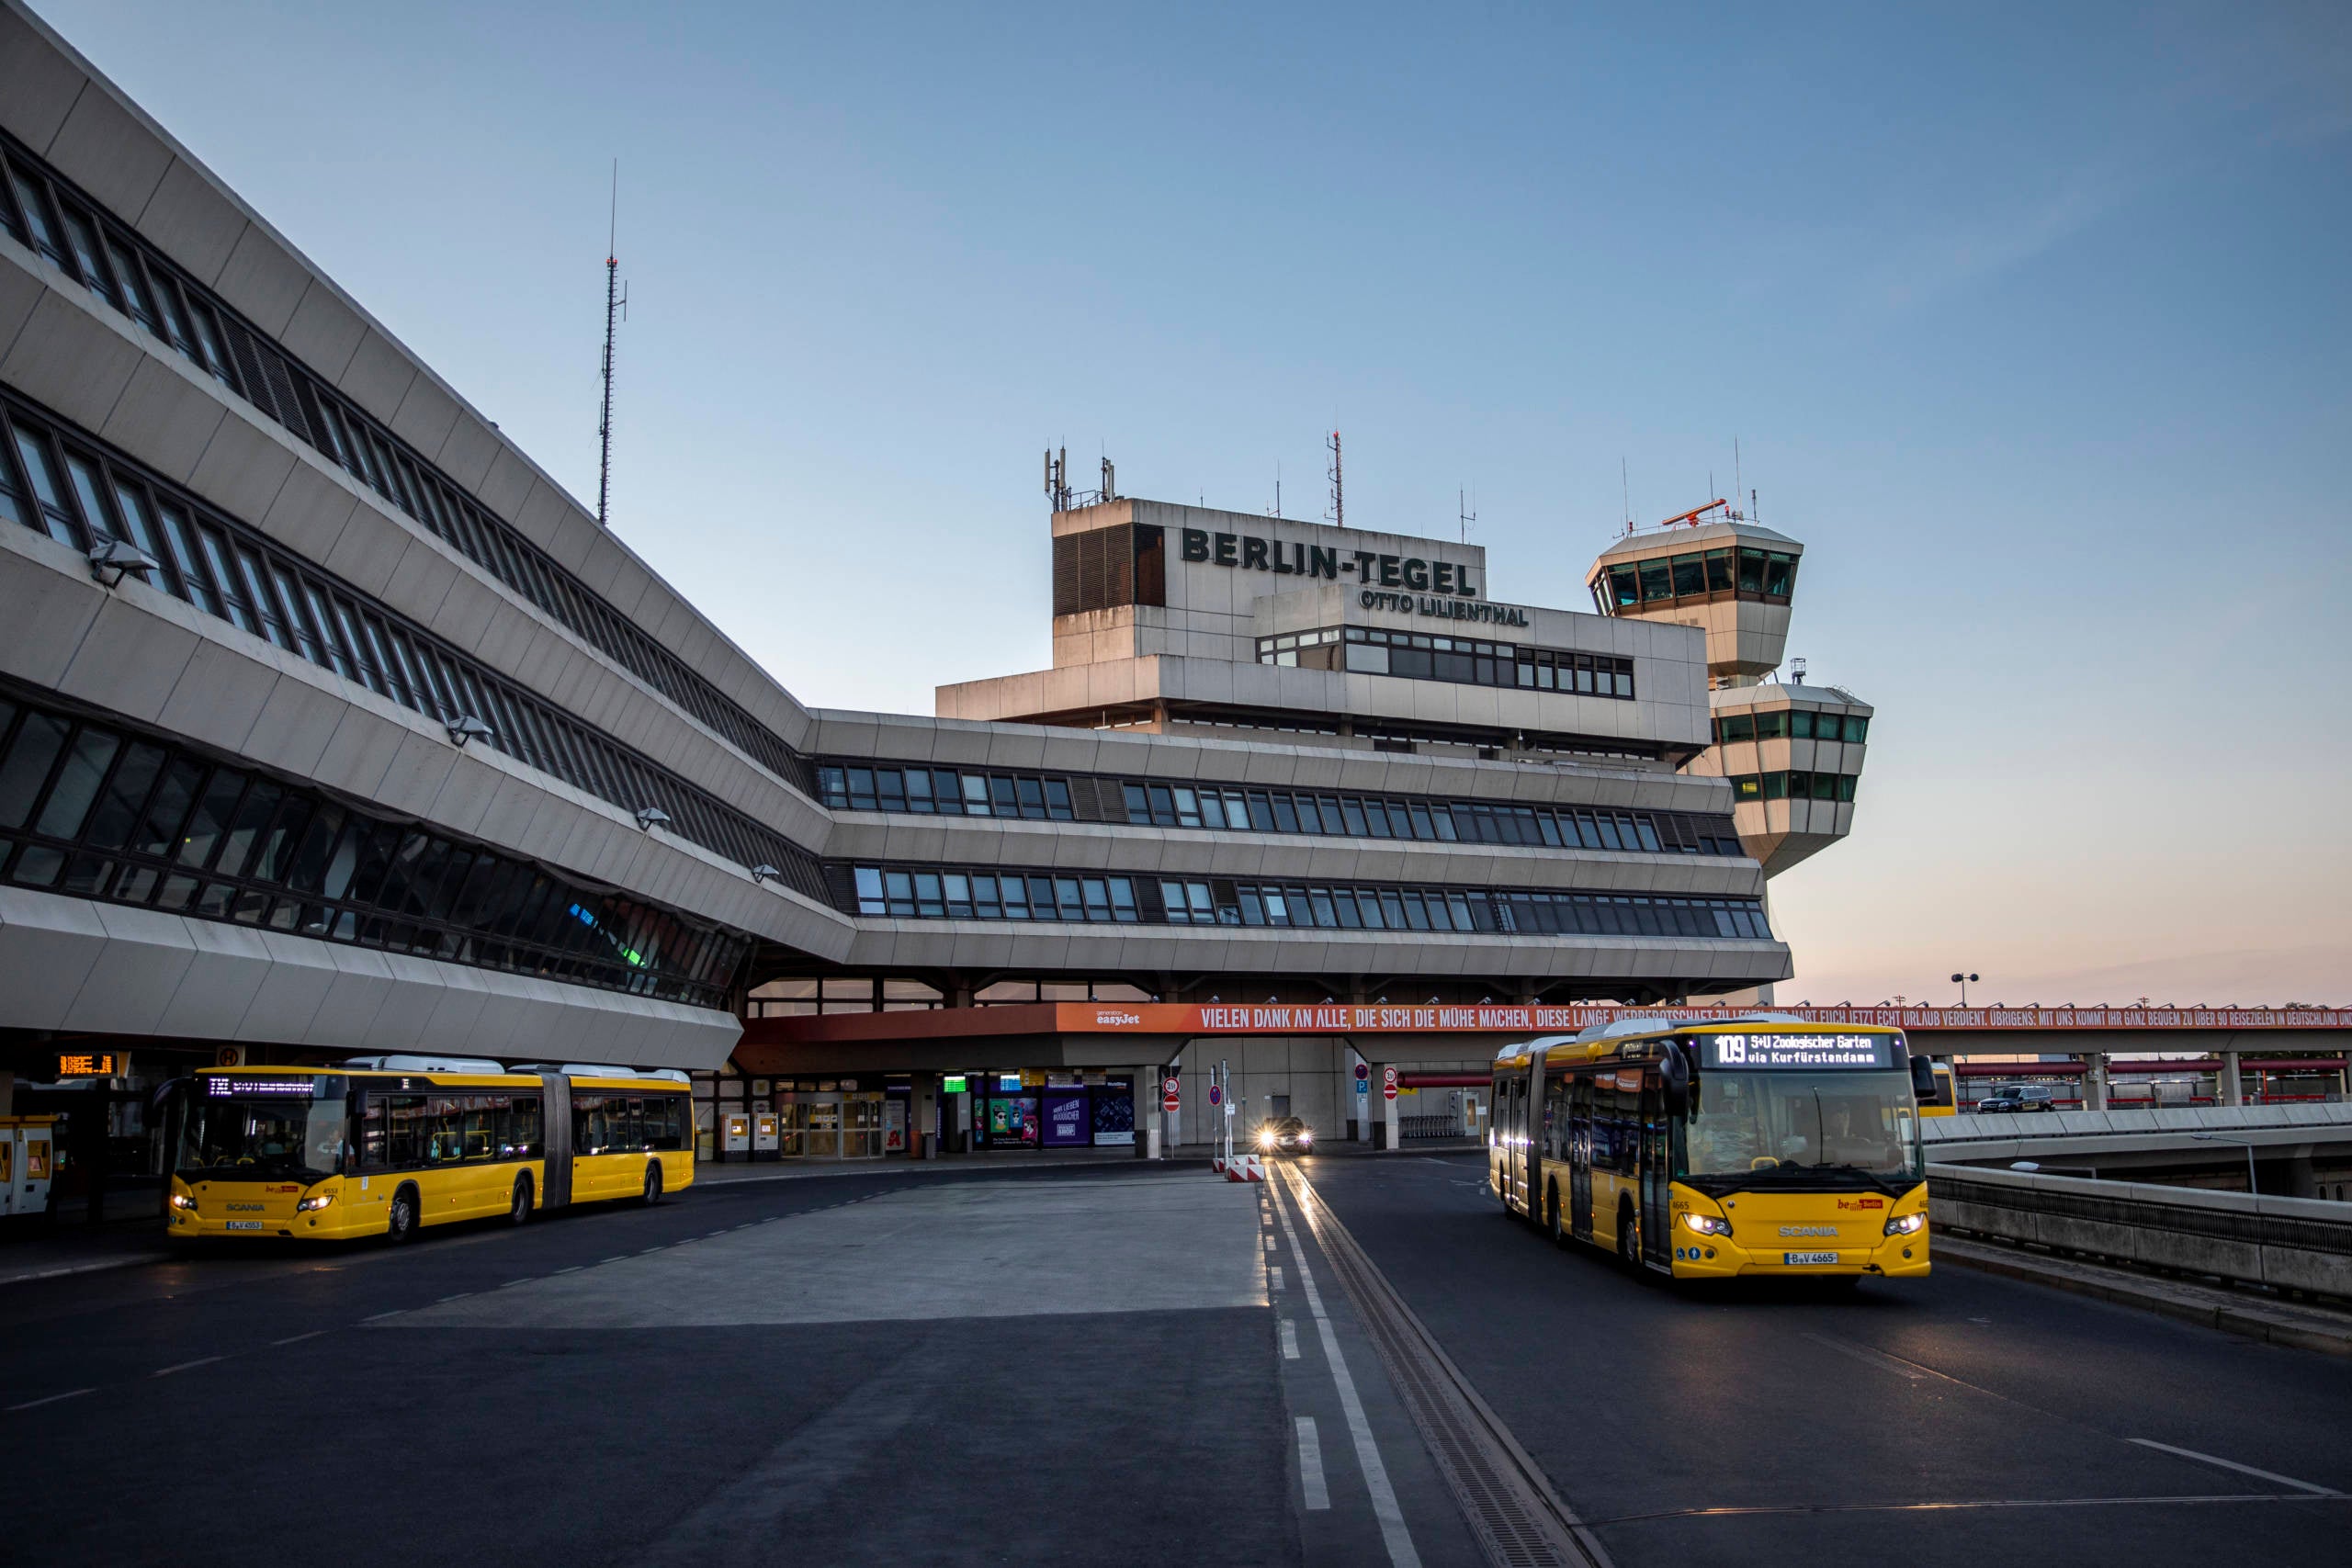 Tegel Airport To Close June 15, Likely For Good